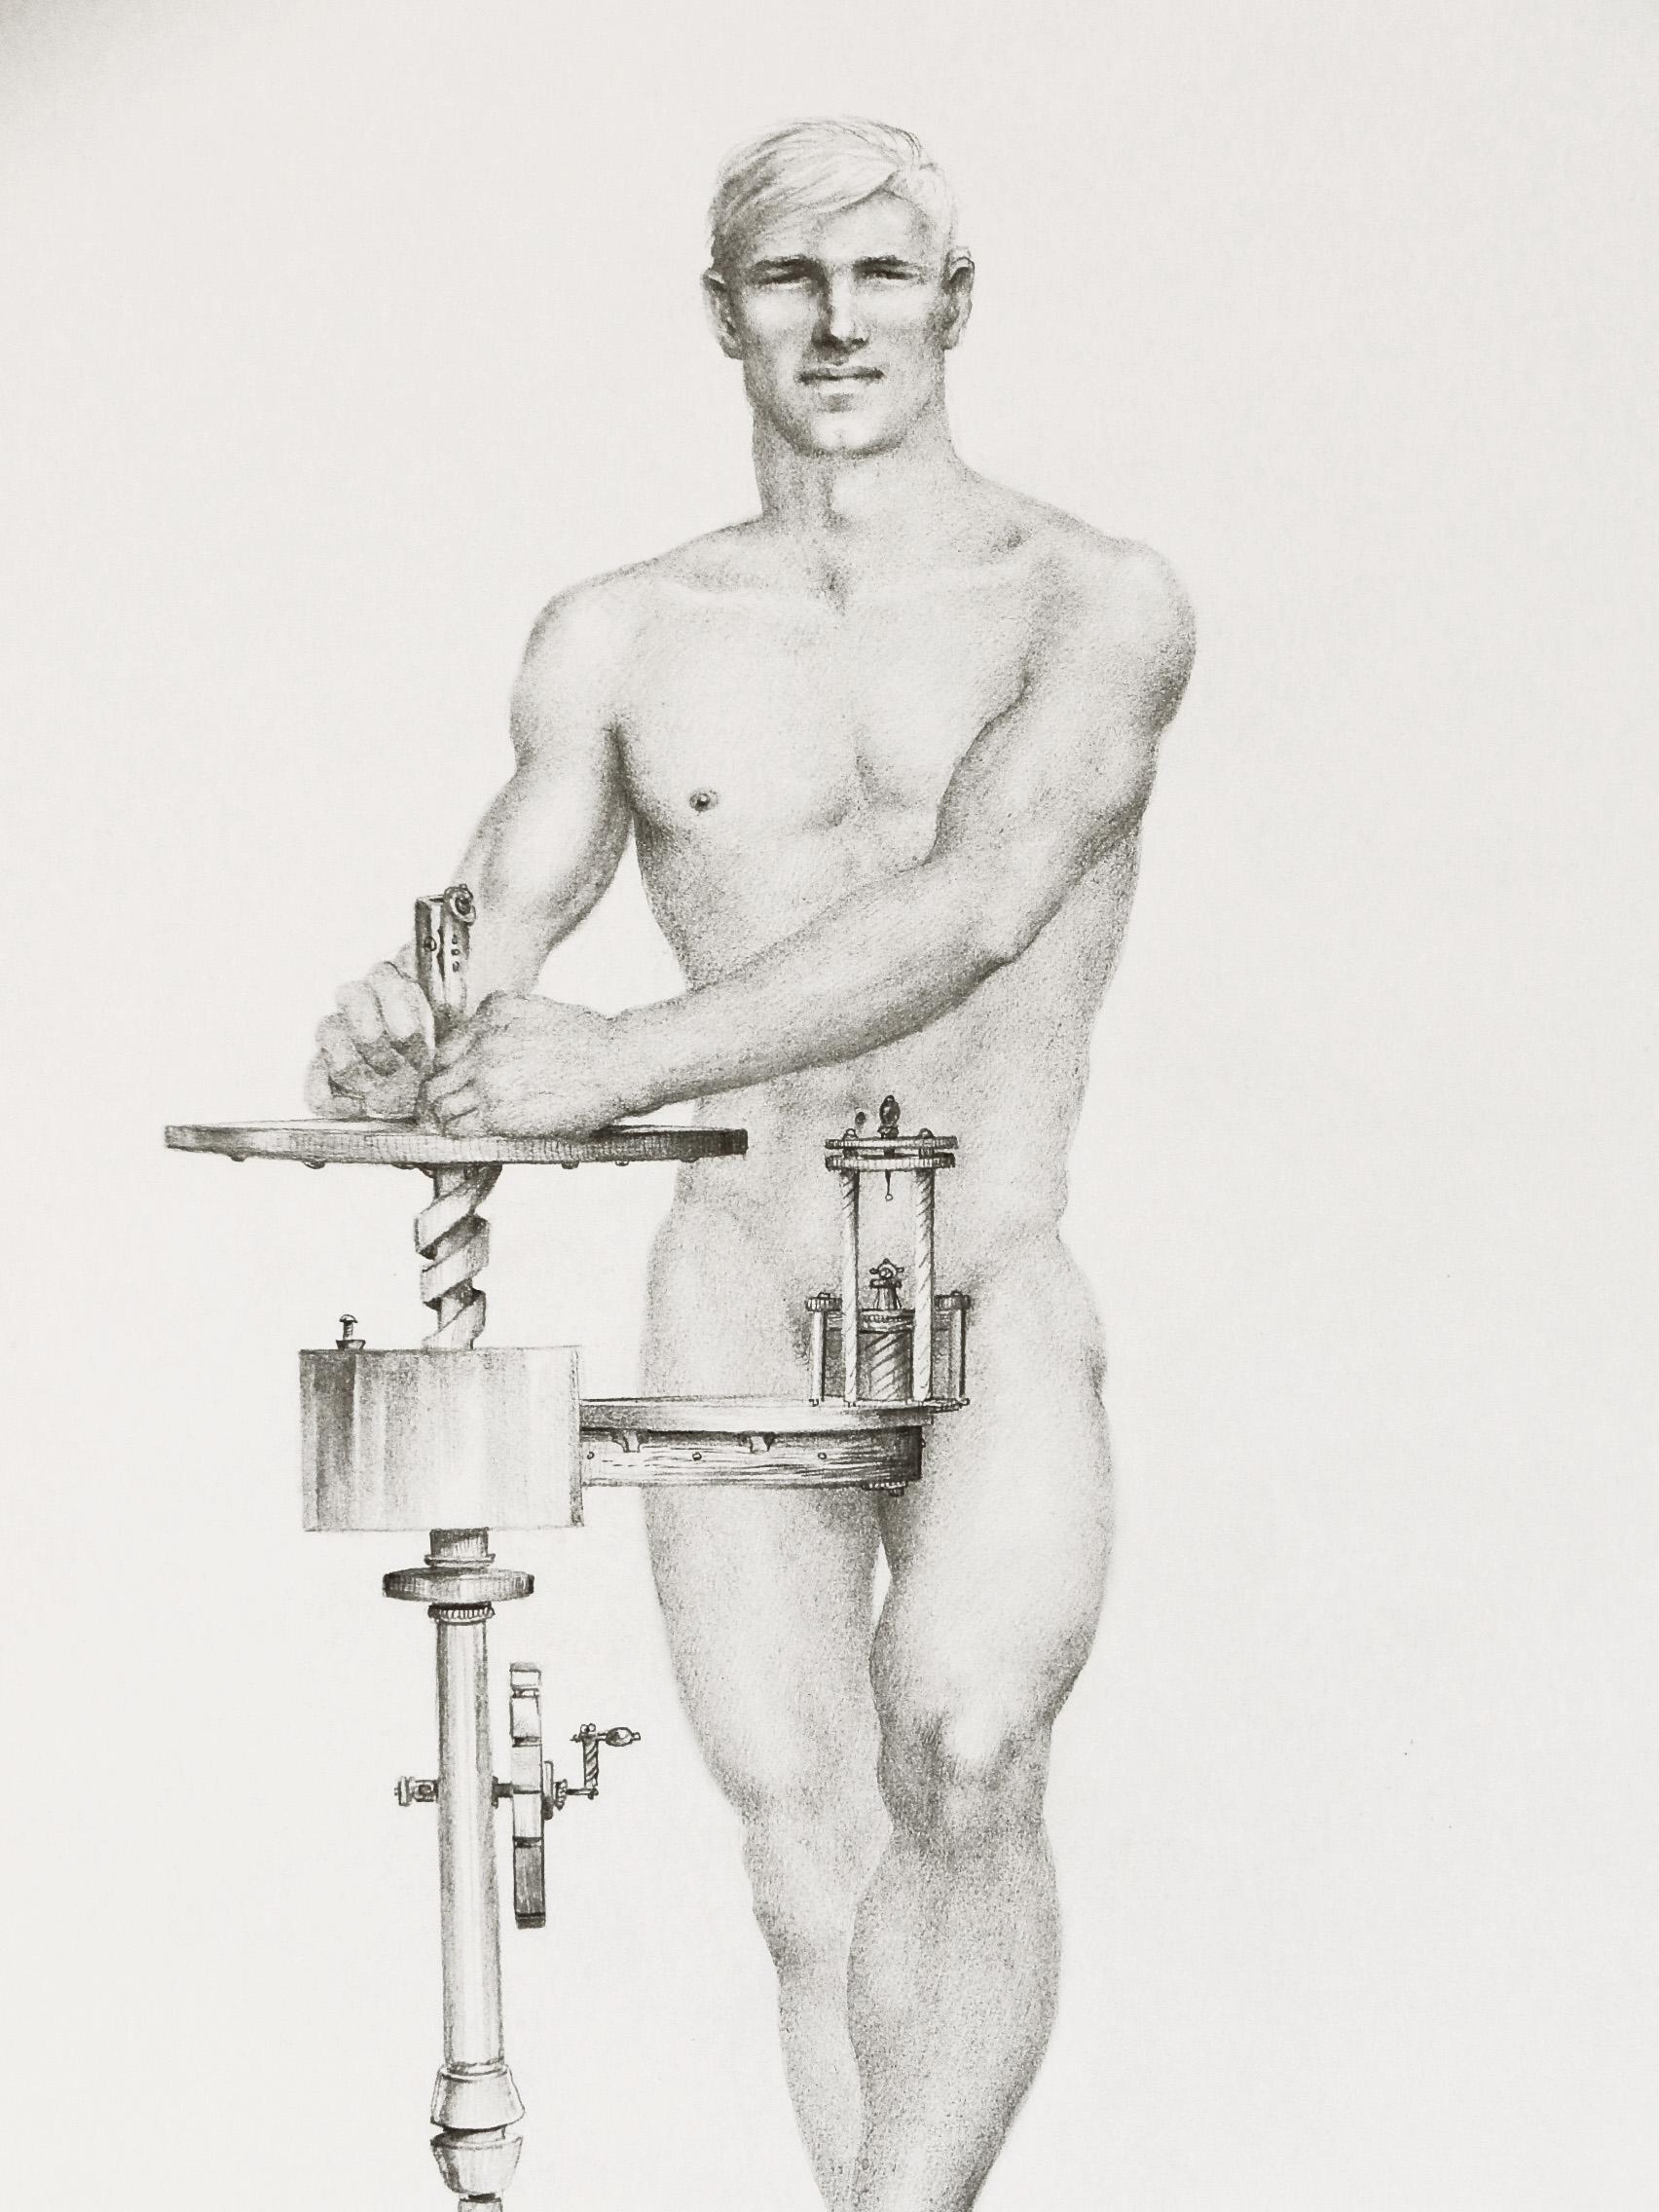 Although John Lear depicts his figure holding a drill press, resting one foot on its plywood base, he inexplicably named this drawing 